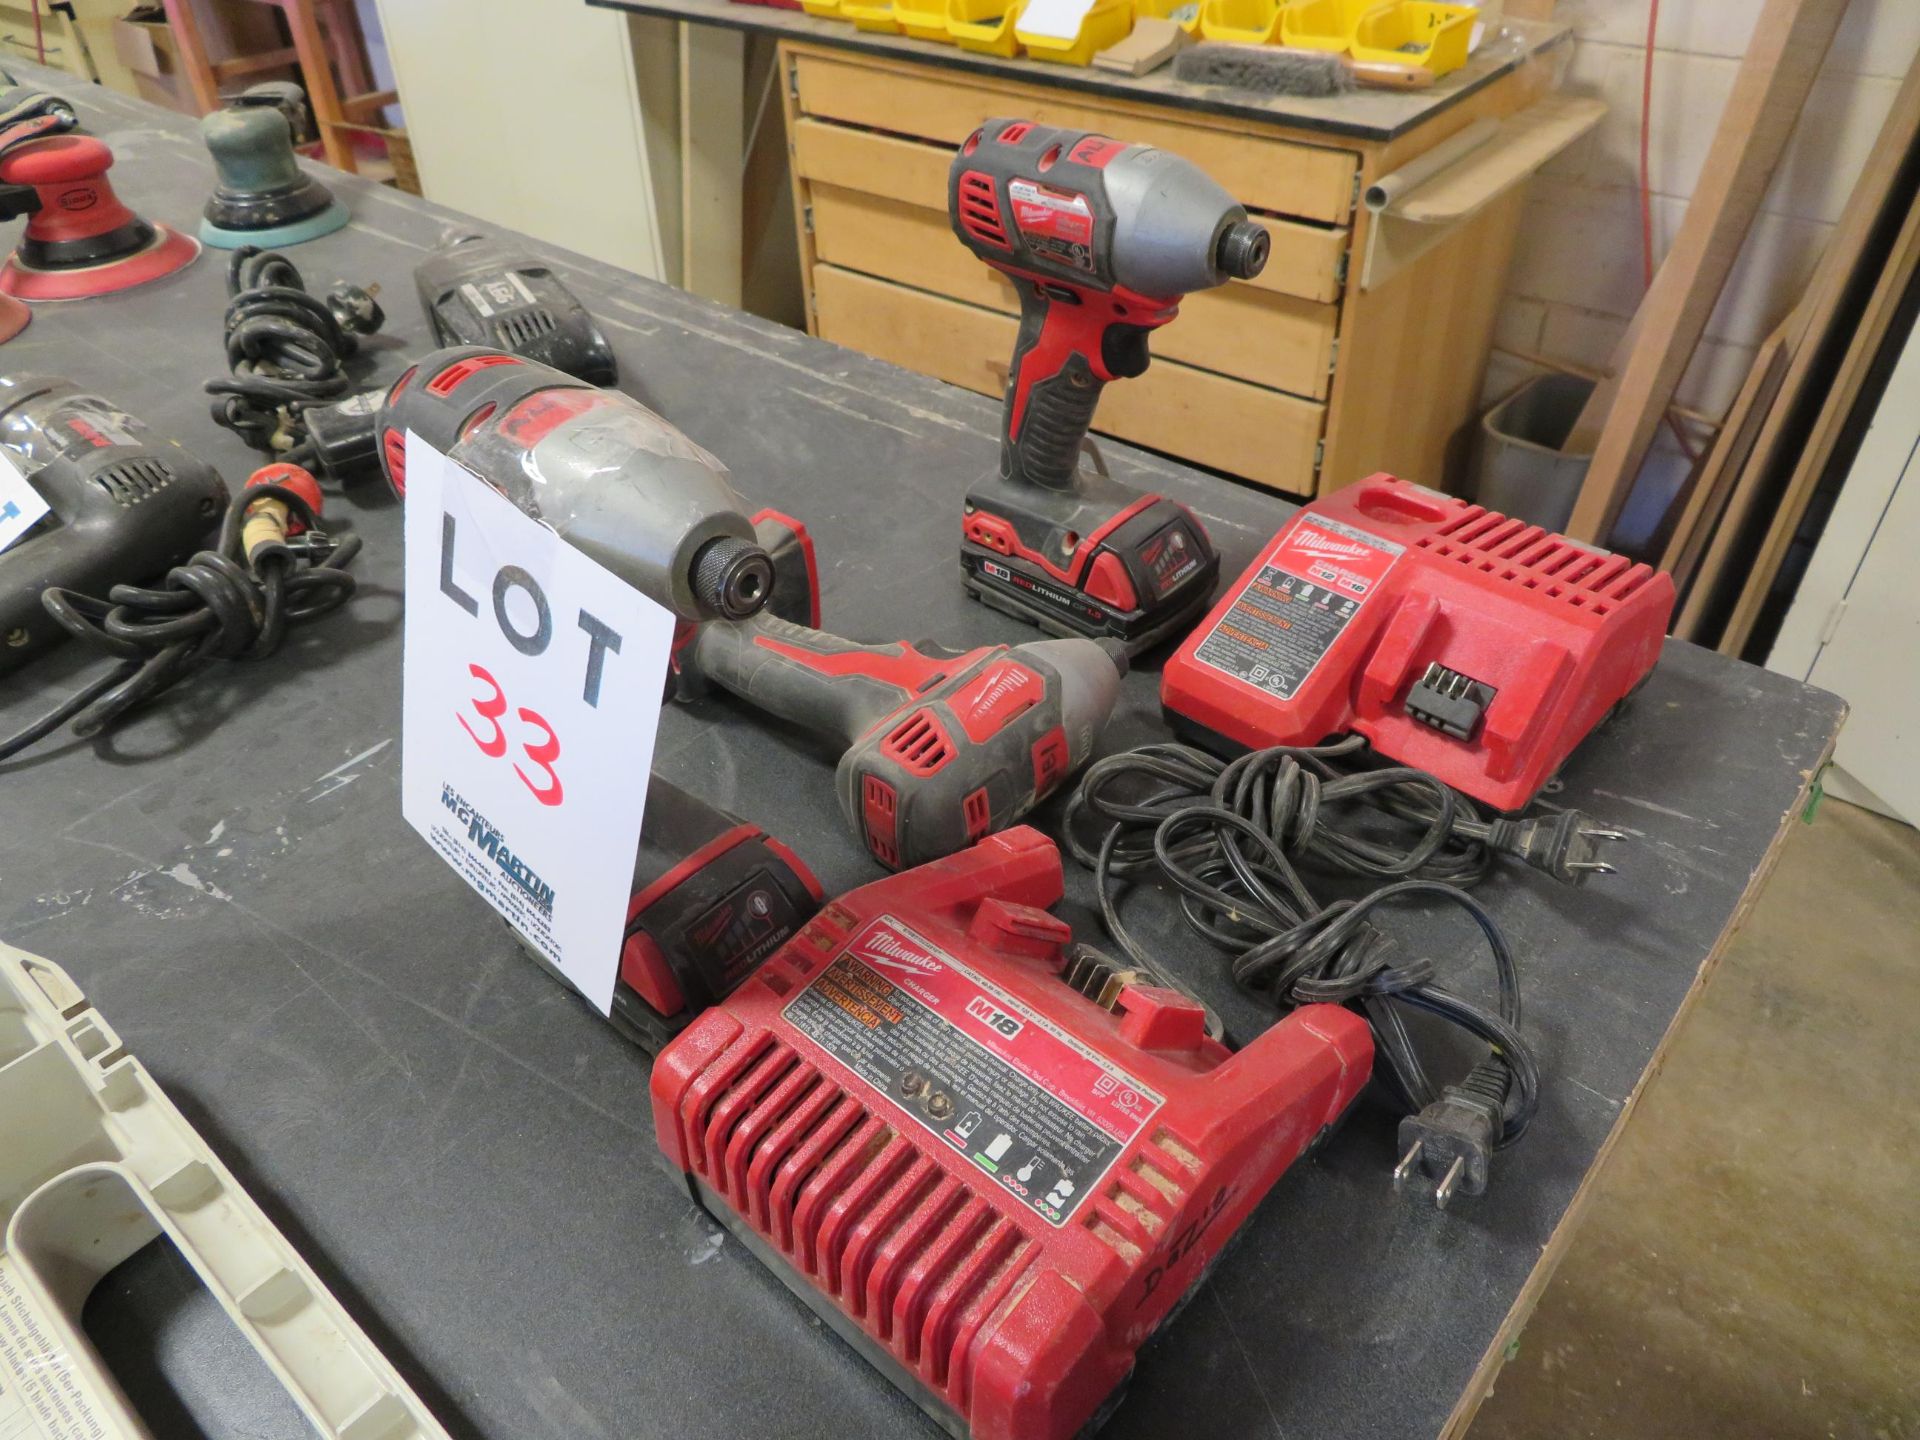 LOT including MILWAUKEE impact drivers (qty 3) ***PLEASE NOTE THAT 1 OF THEM HAS NO BATTERY*** - Image 2 of 2